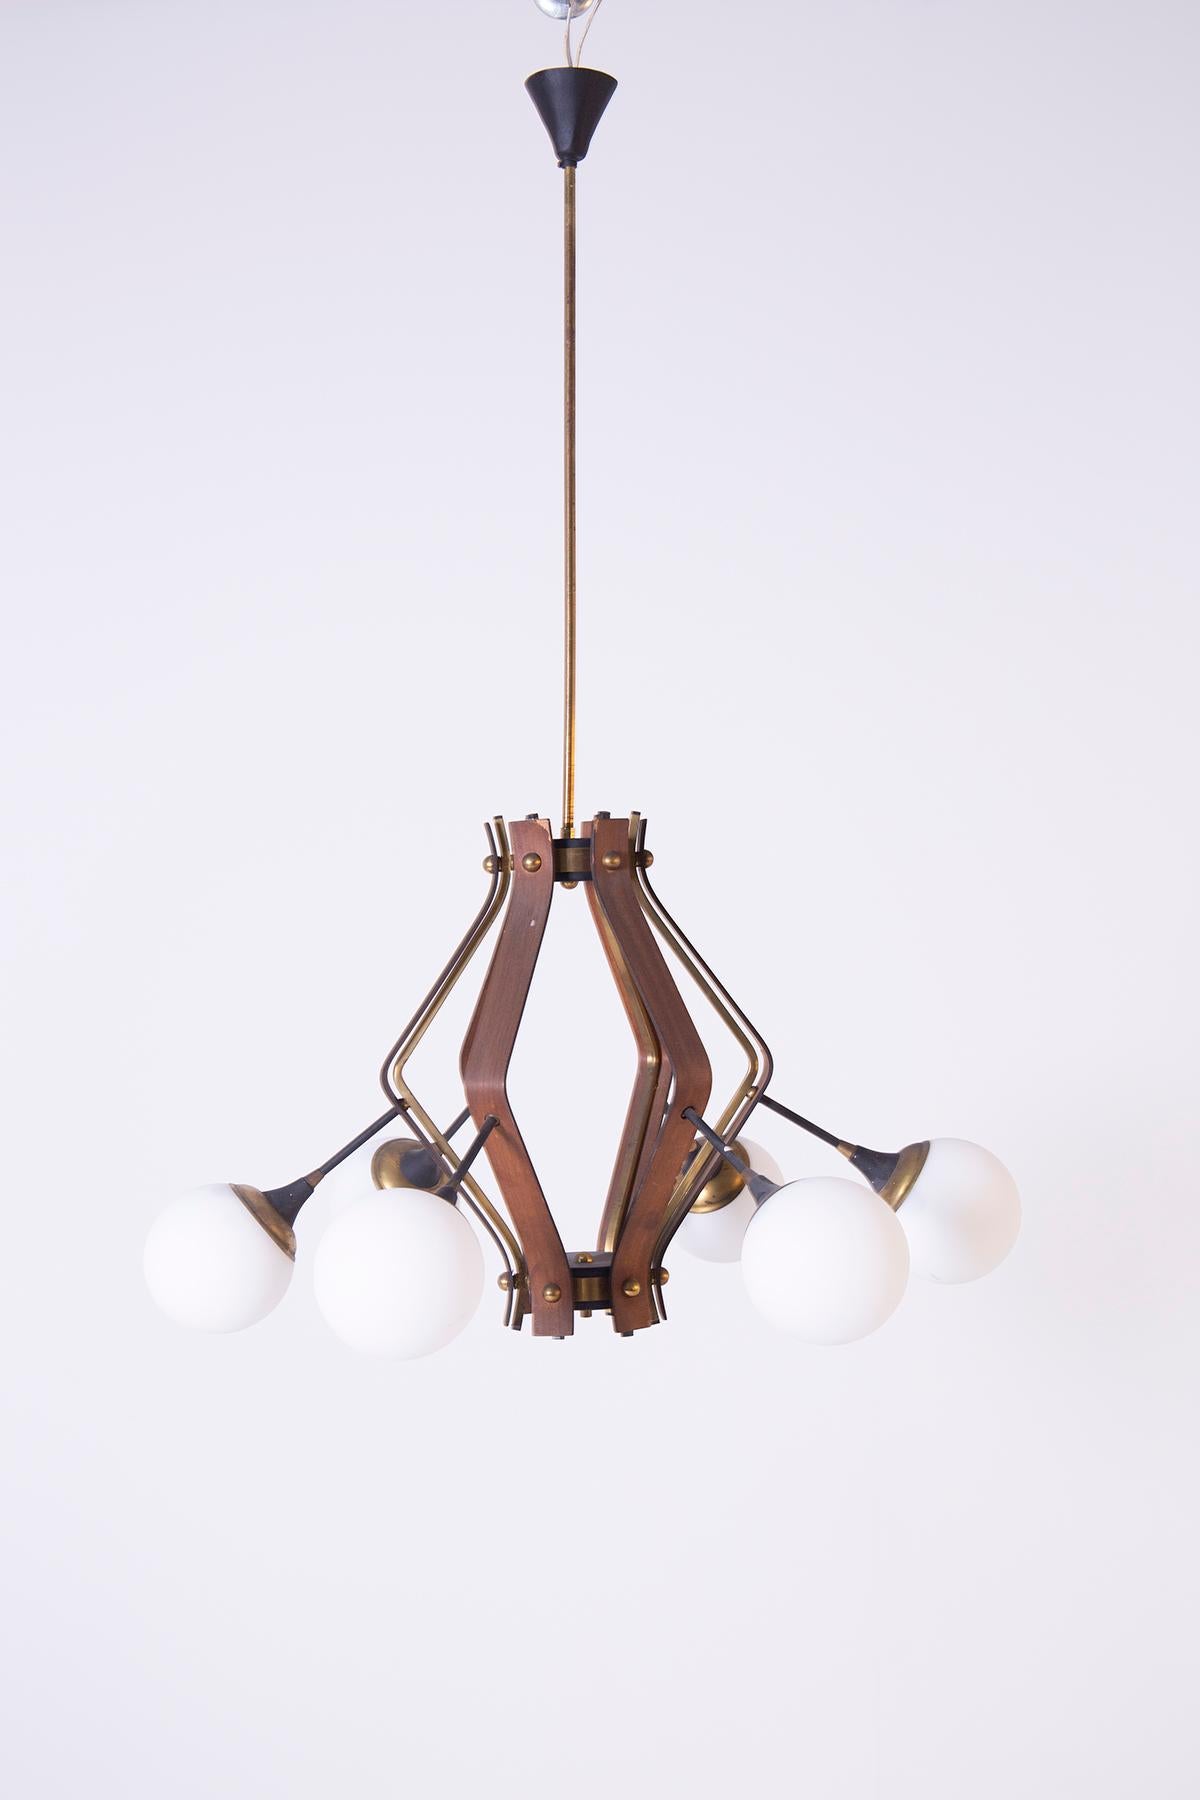 Wonderful vintage ceiling chandelier in brass, wood, glass and aluminum from the 1950s.
The structure of the vintage ceiling chandelier has a very special shape, all made of wood and brass, from which the six arms of the chandelier are connected